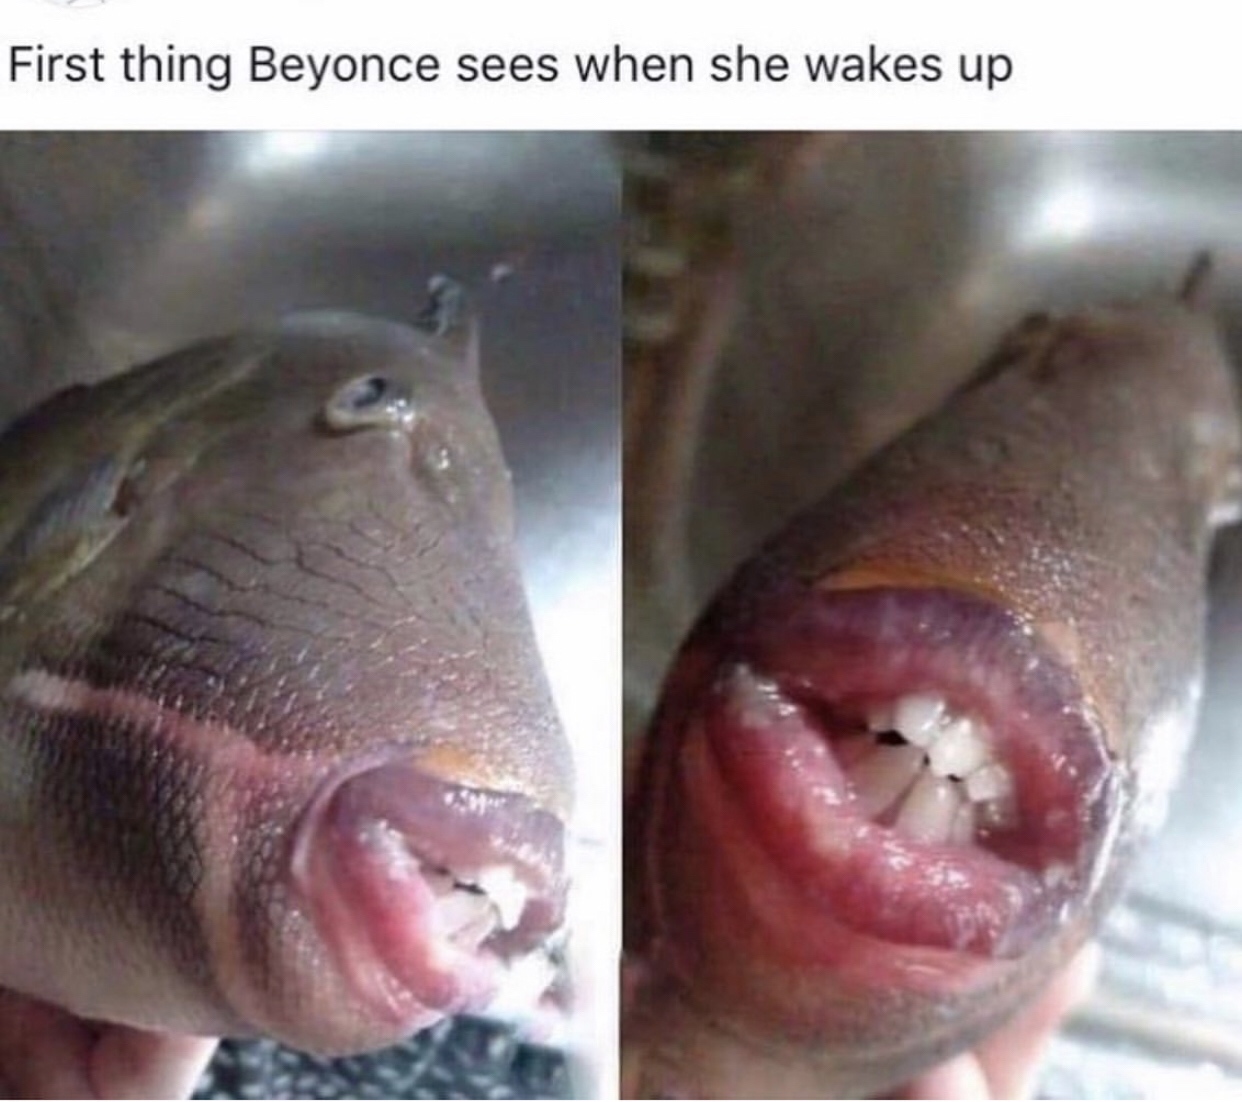 beyonce wakes up - First thing Beyonce sees when she wakes up